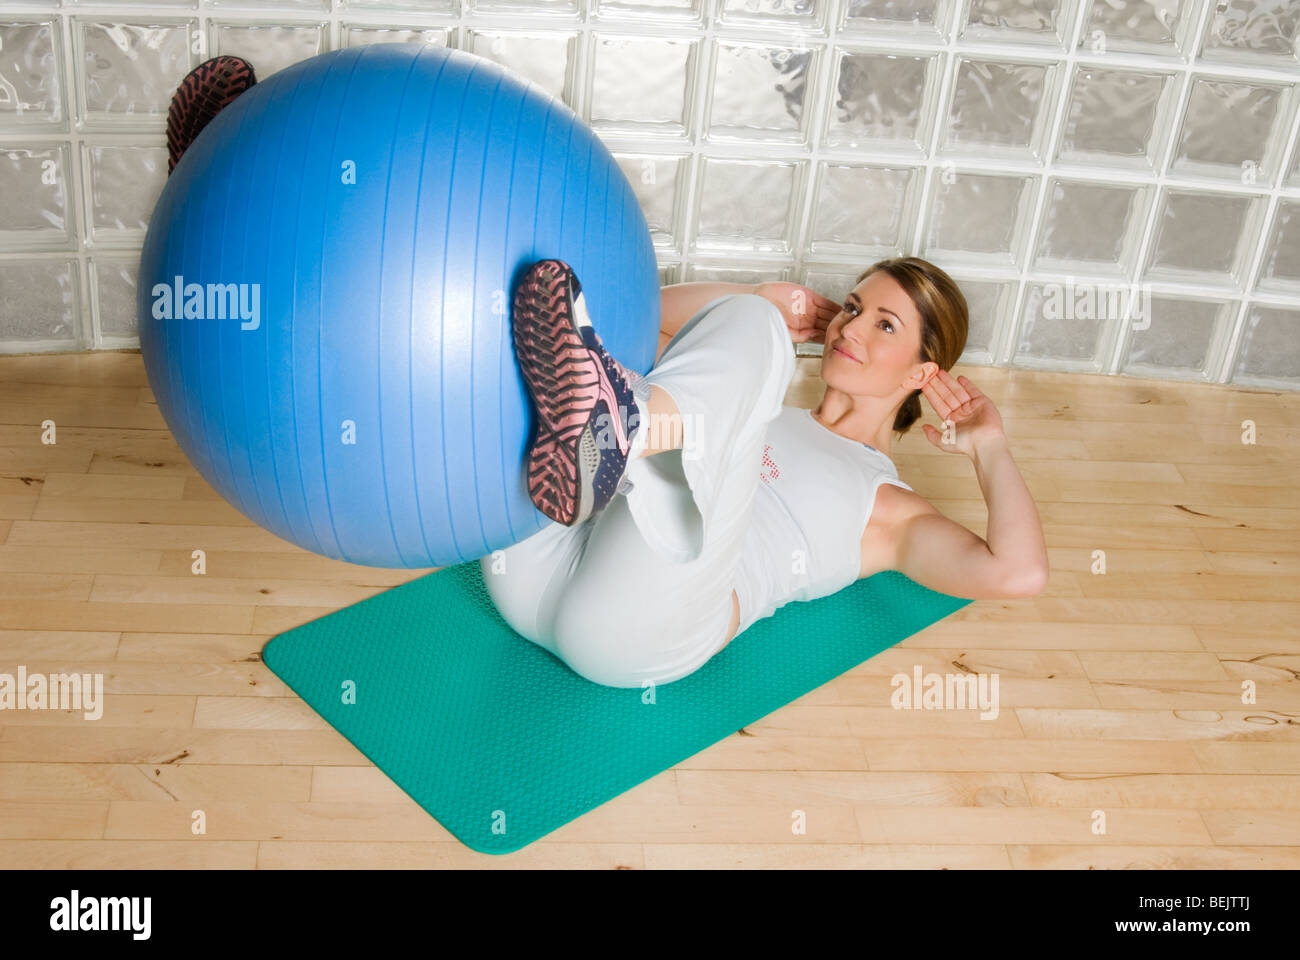 Woman using exercise ball to train / work out in a gymnasium Stock Photo